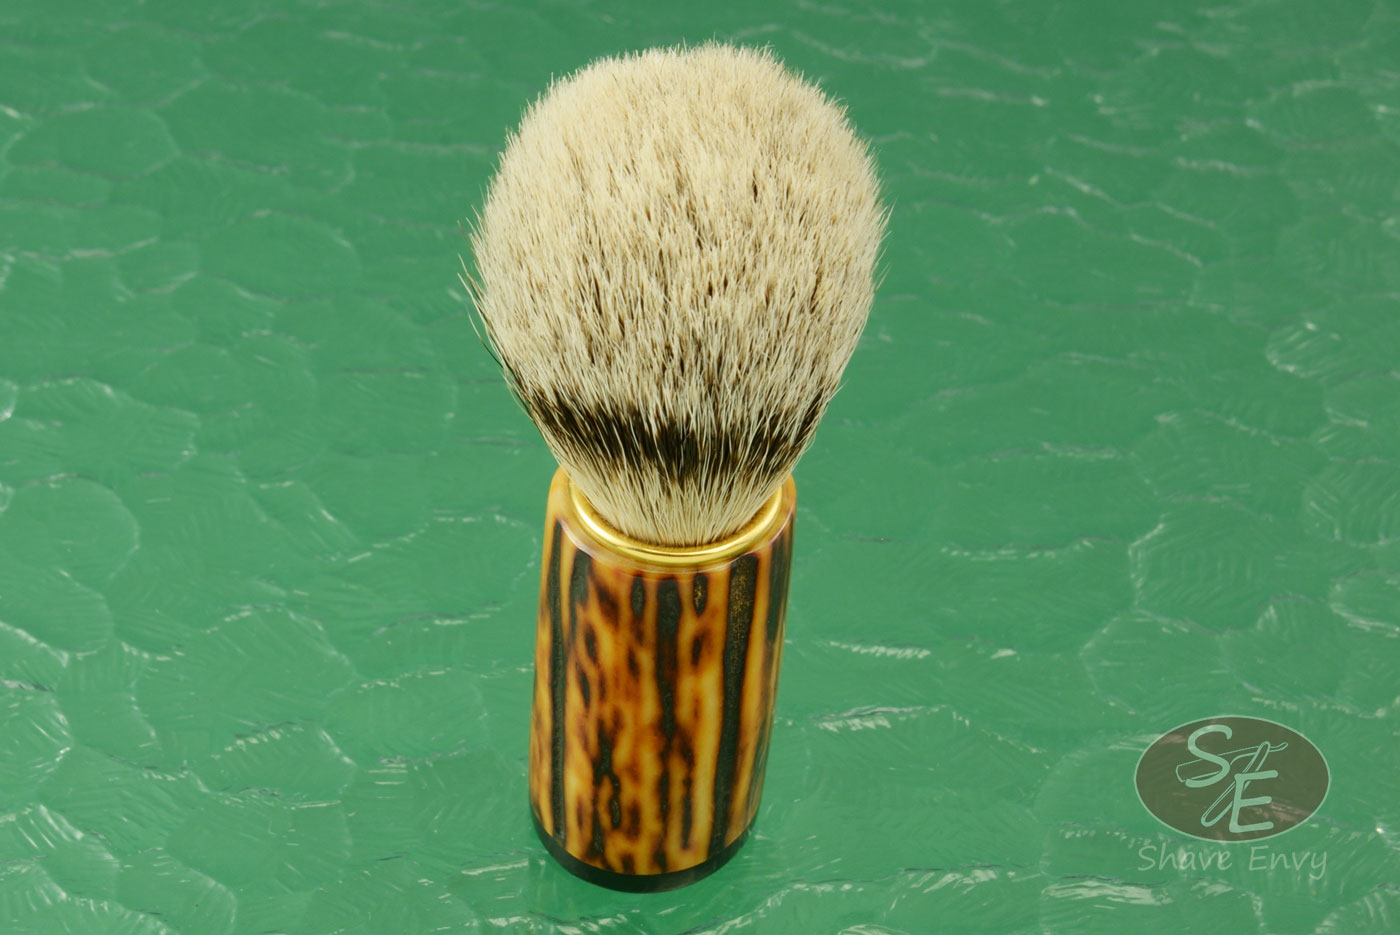 Silvertip Shaving Brush with Amber Stag